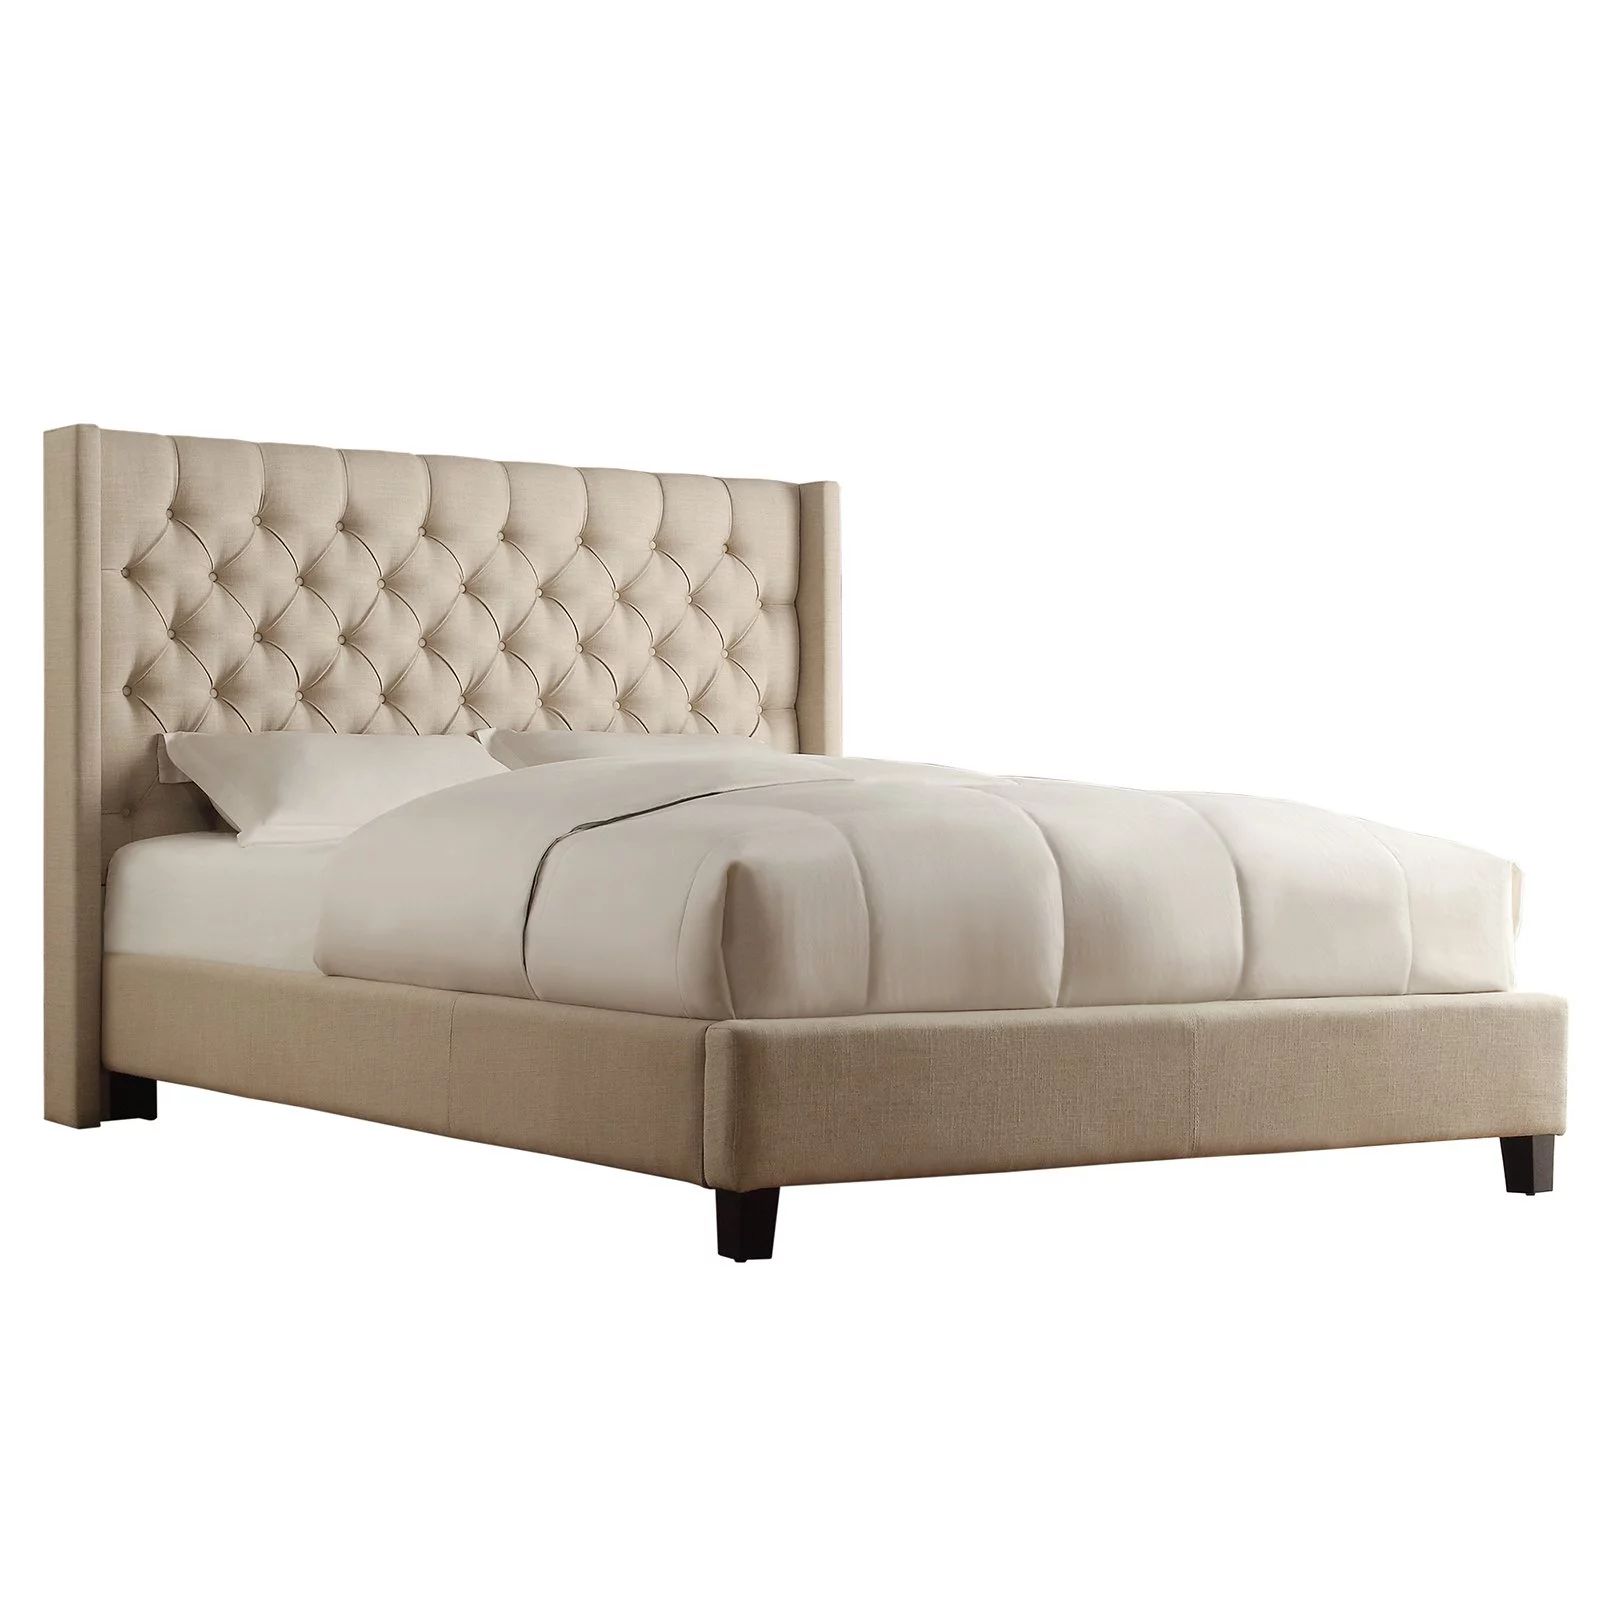 Weston Home Yarmouth Wingback Upholstered Low Profile Bed | Walmart (US)